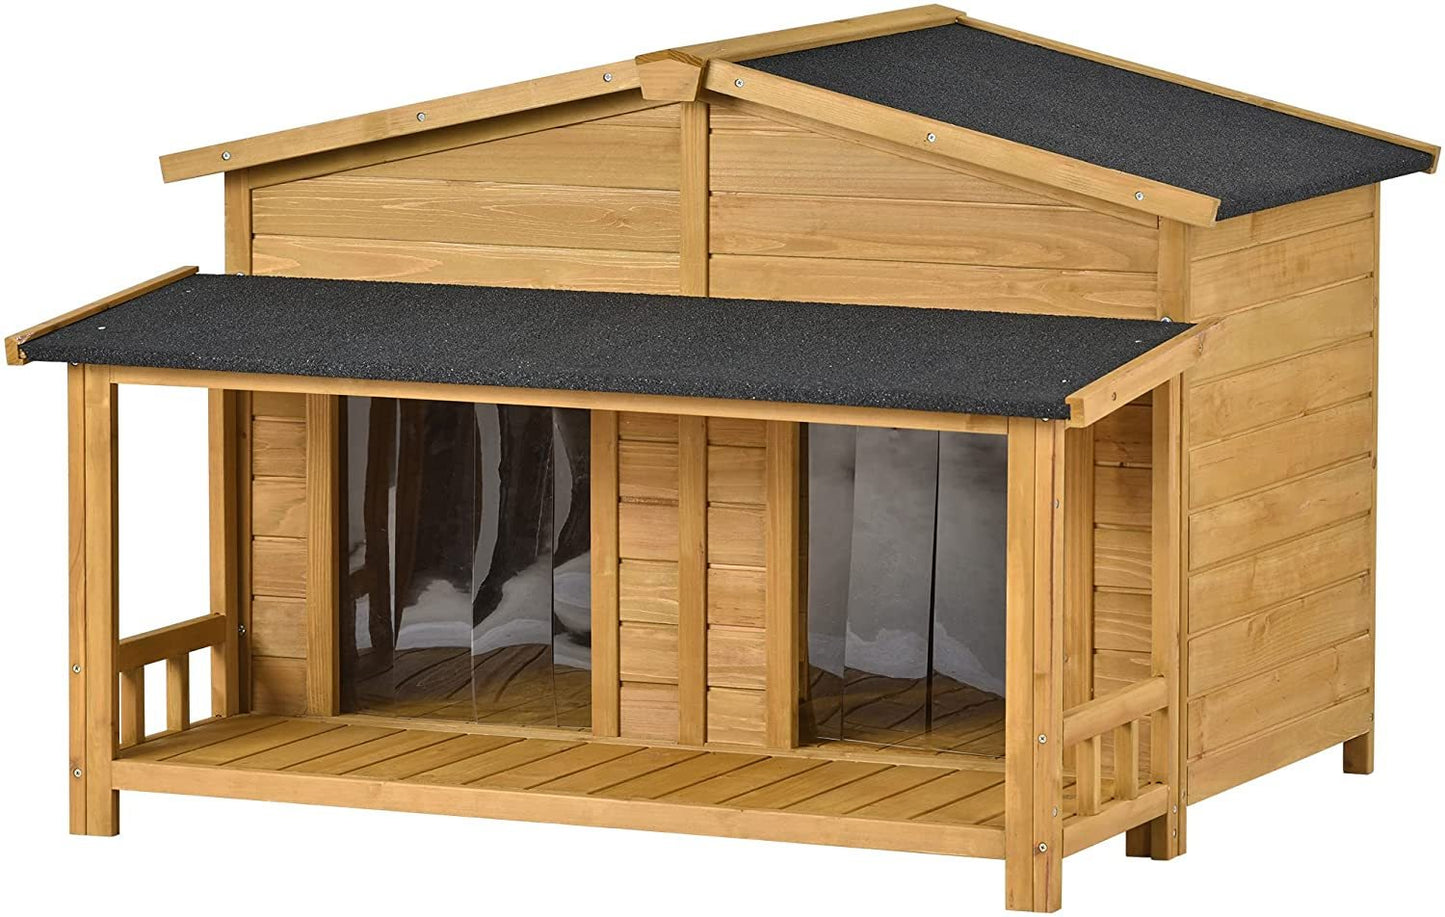 ANYSUN Large Wooden Dog House, Outdoor & Indoor with Porch, 2 Doors